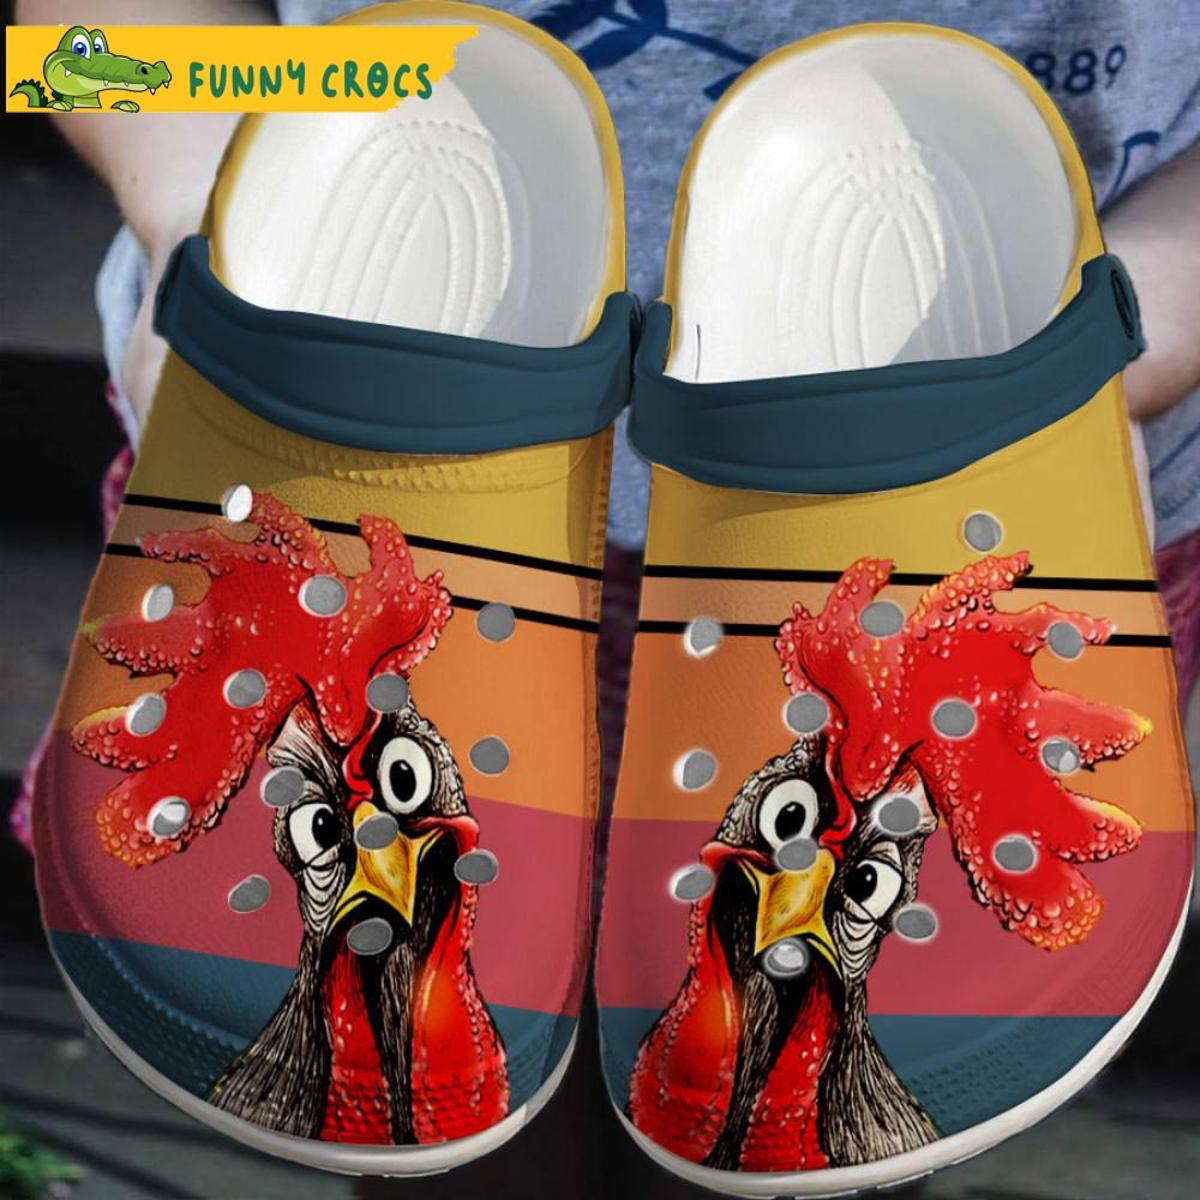 Funny Family Chicken Crocs Slippers